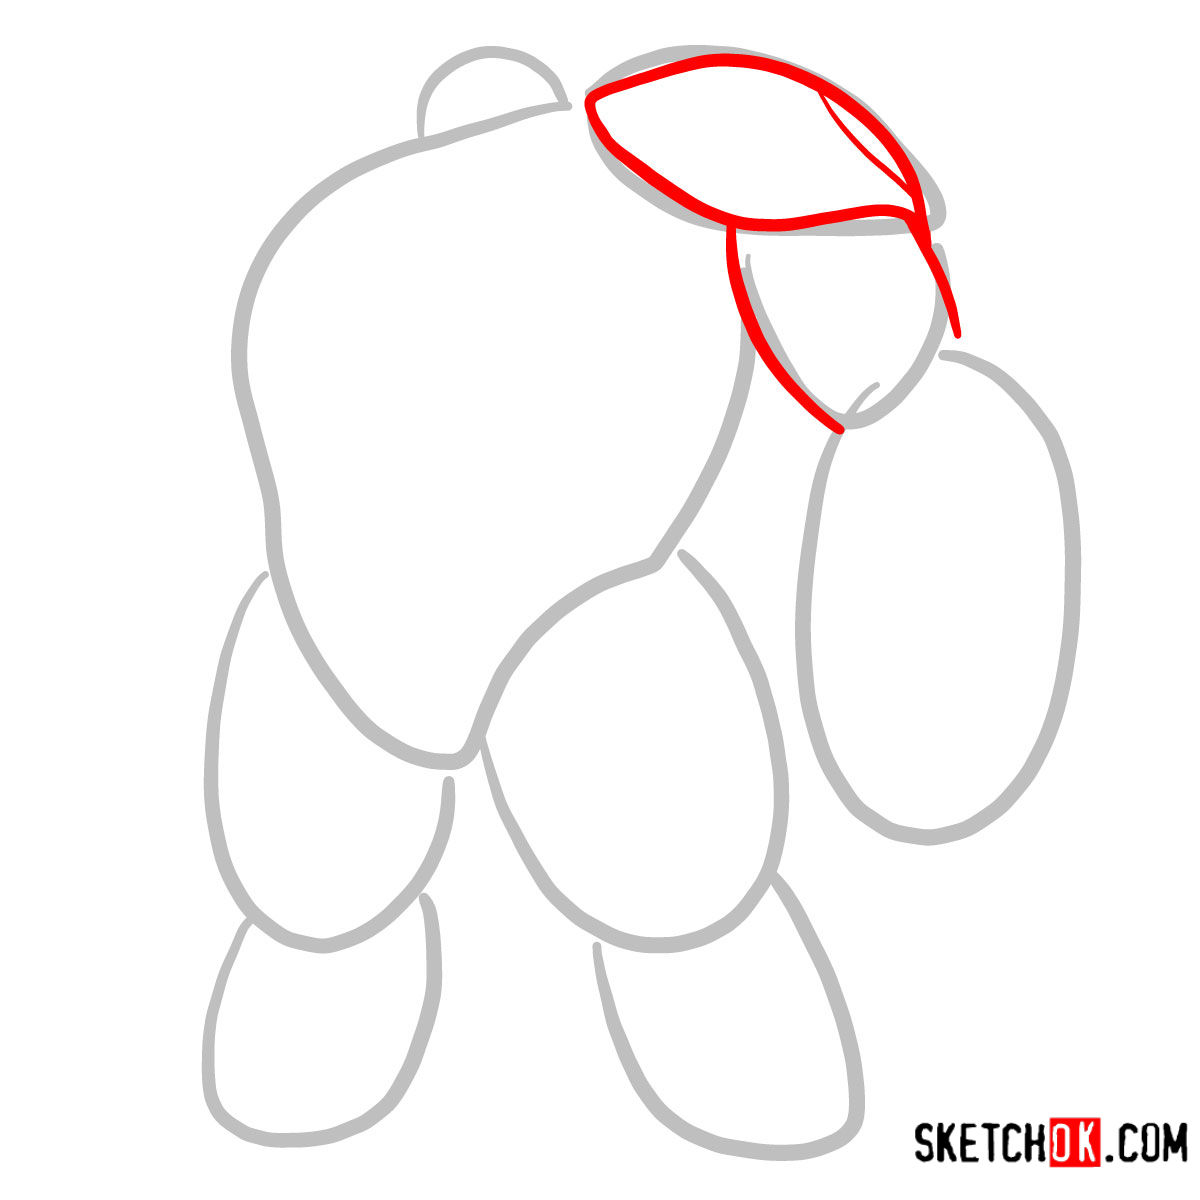 How to draw Baymax in his red armored suit - step 02